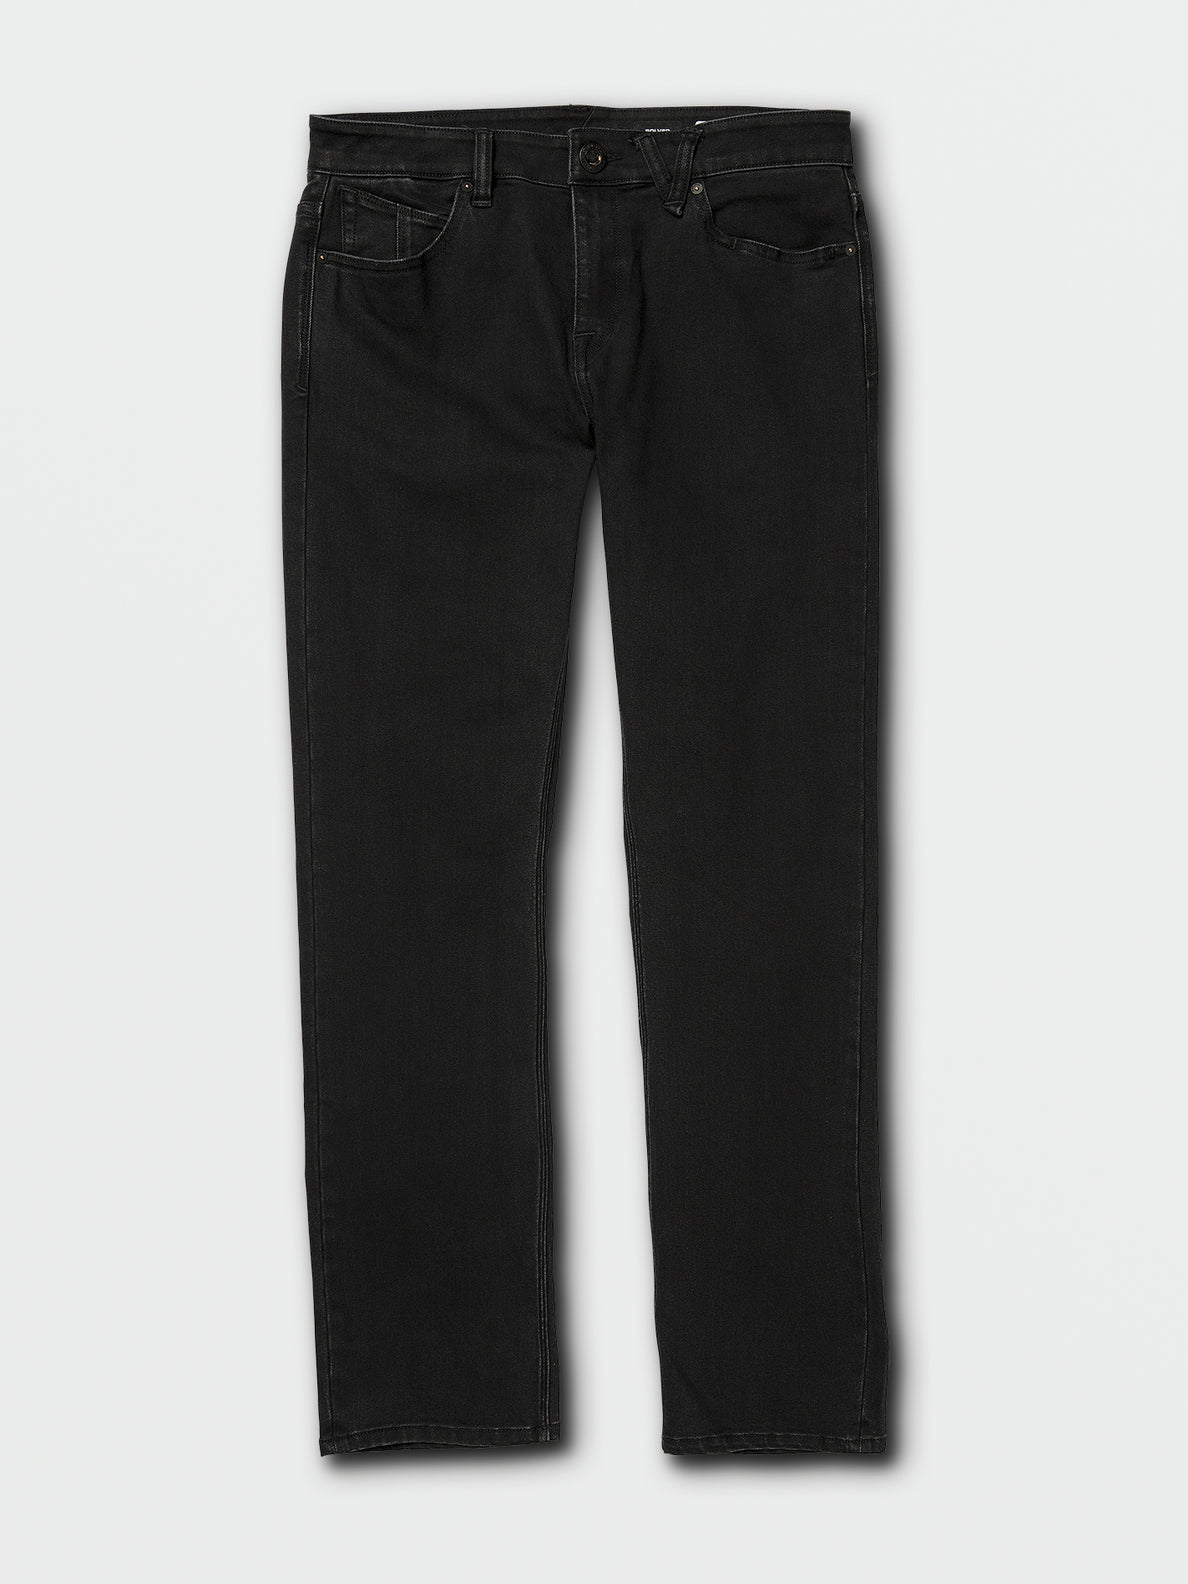 Solver Modern Fit Jeans - Black Out (A1931503_BKO) [F]